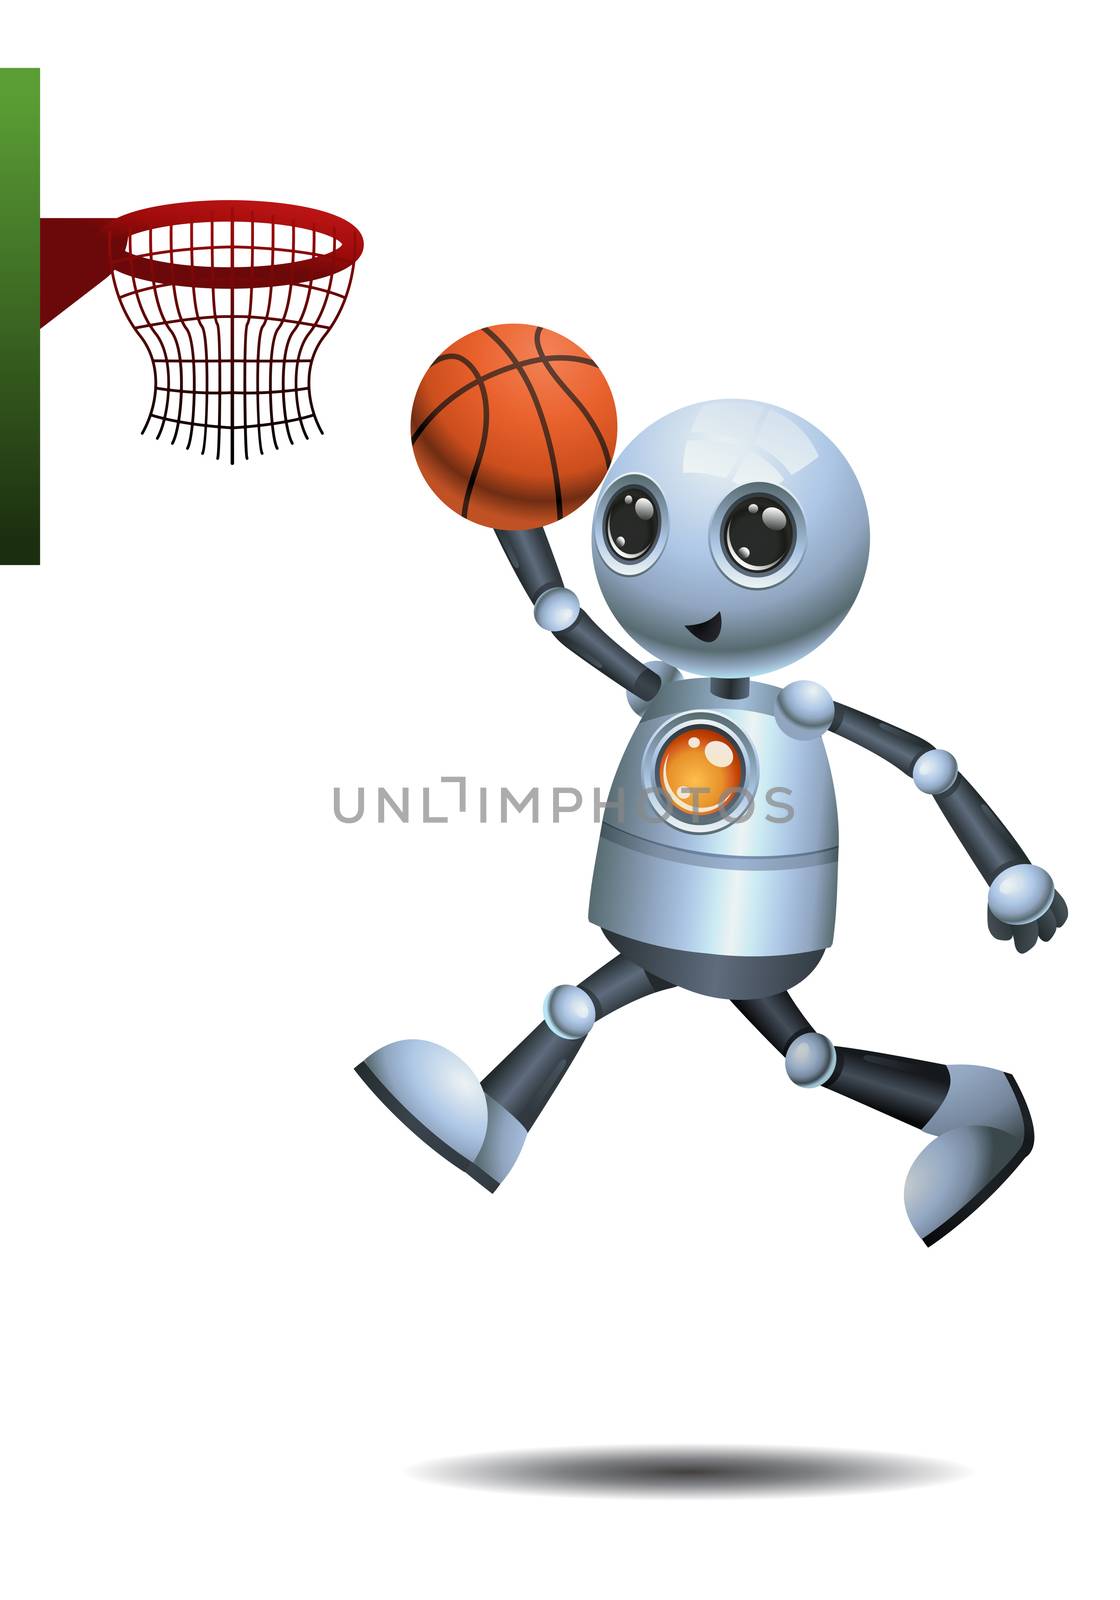 little robot play basket ball by onime